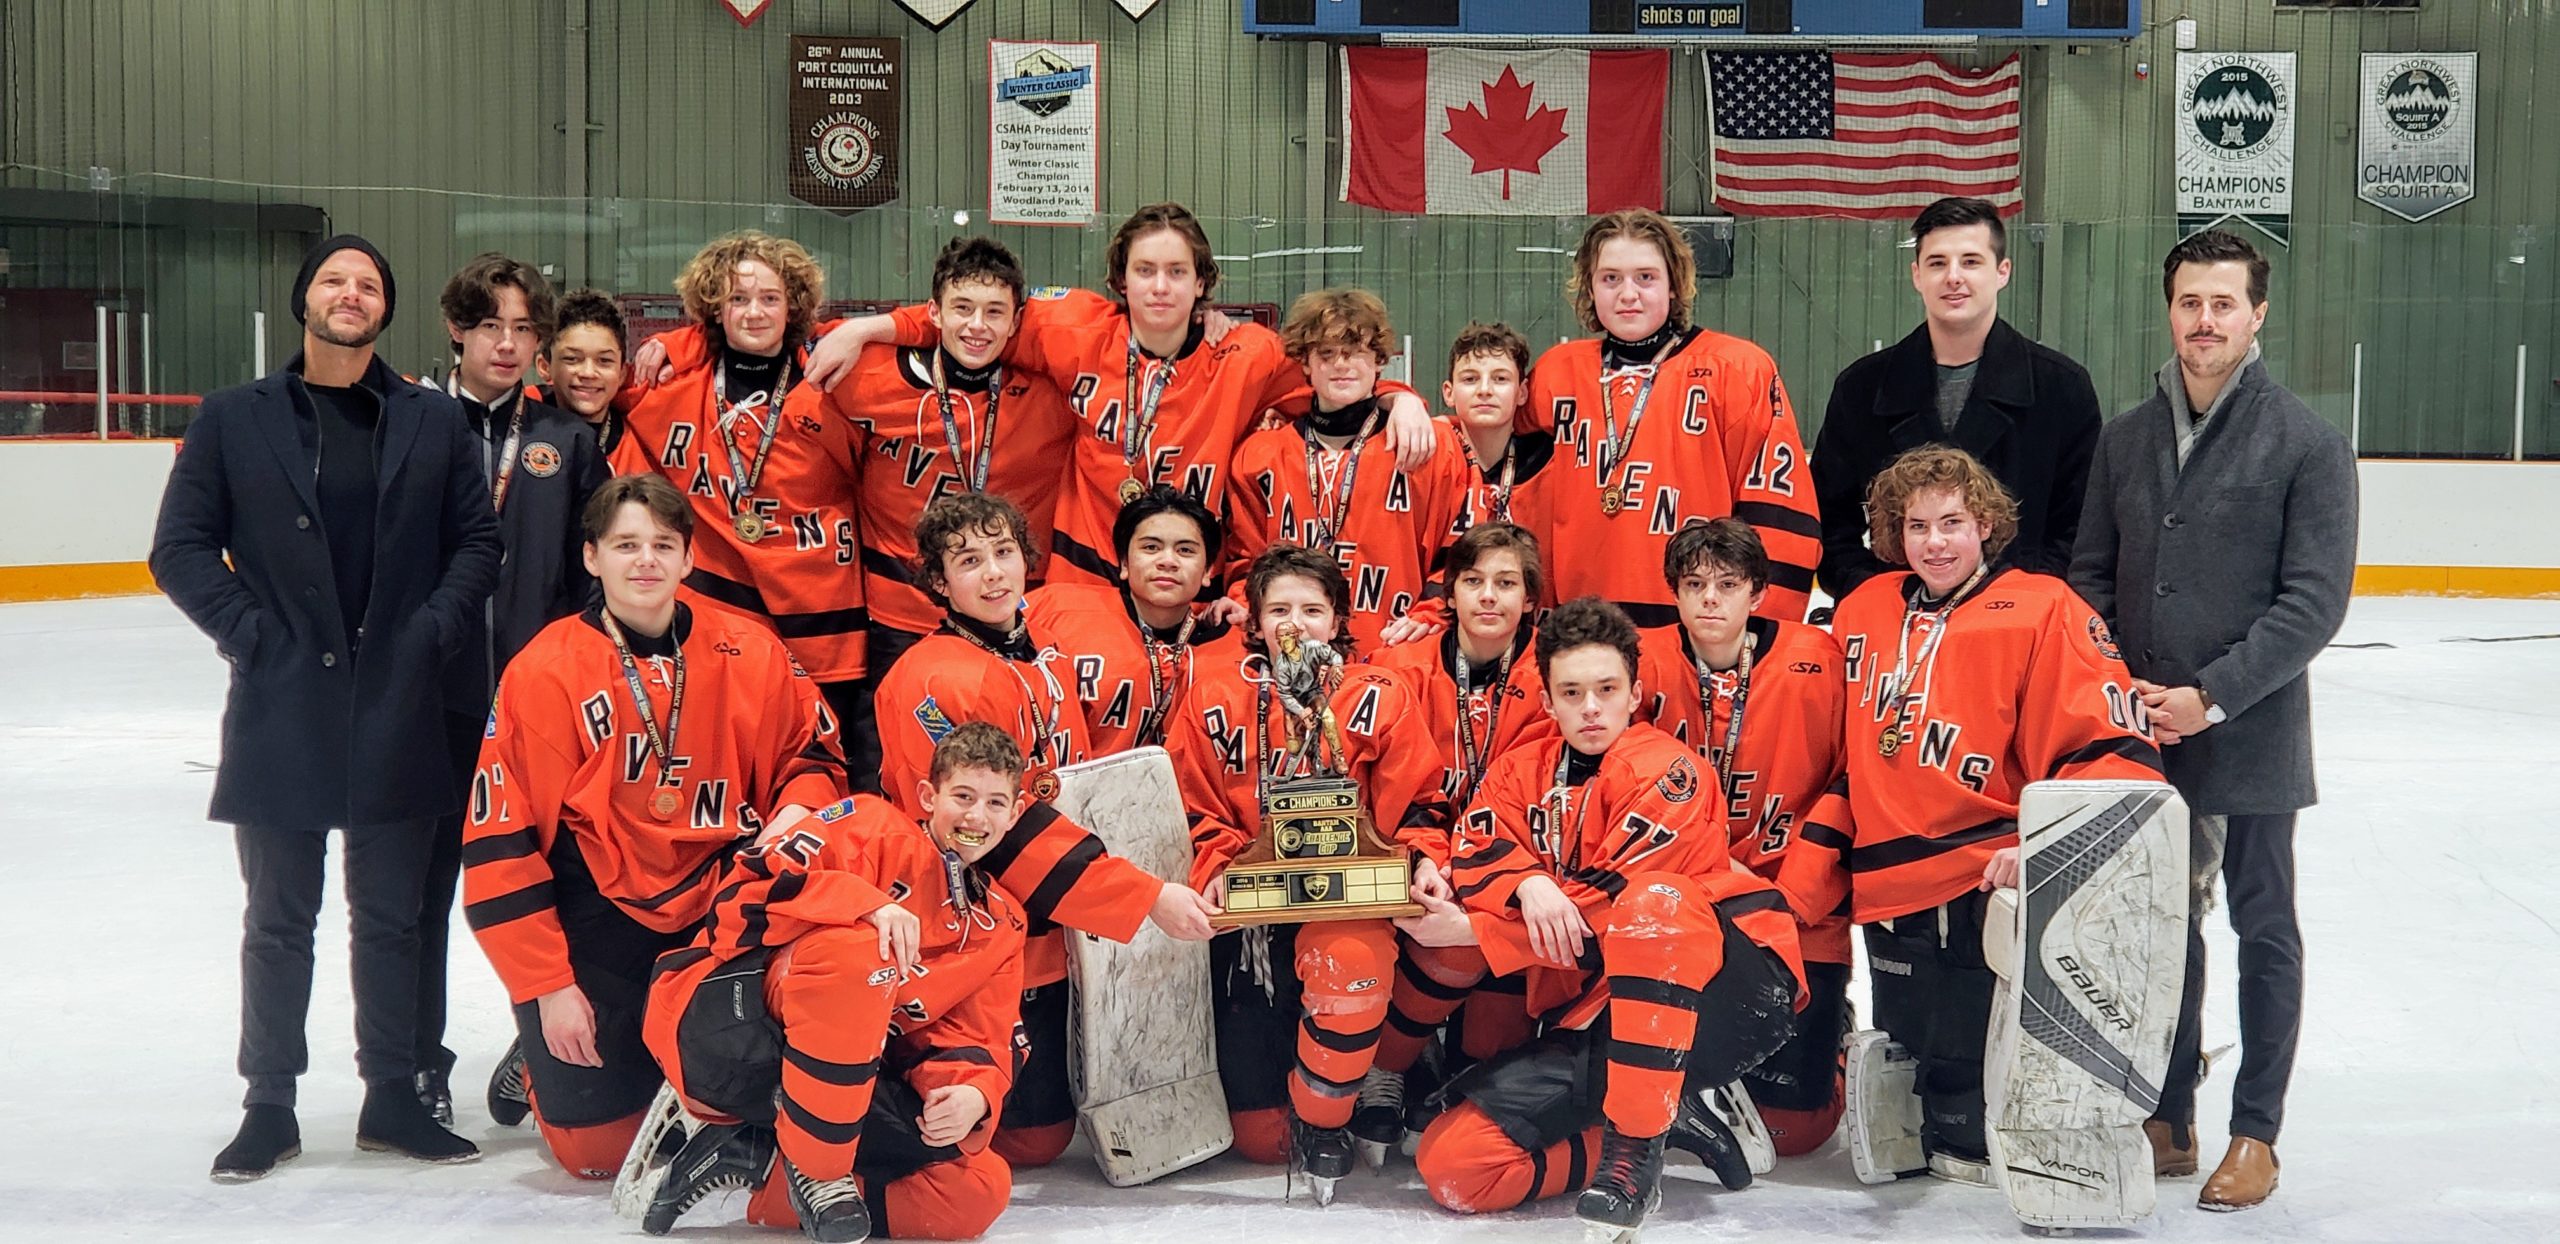 January 12, 2020 ~ Bantam A1 sweeps the Paul Brenner Memorial tournament in Chilliwack and brings home the GOLD! Congrats team!